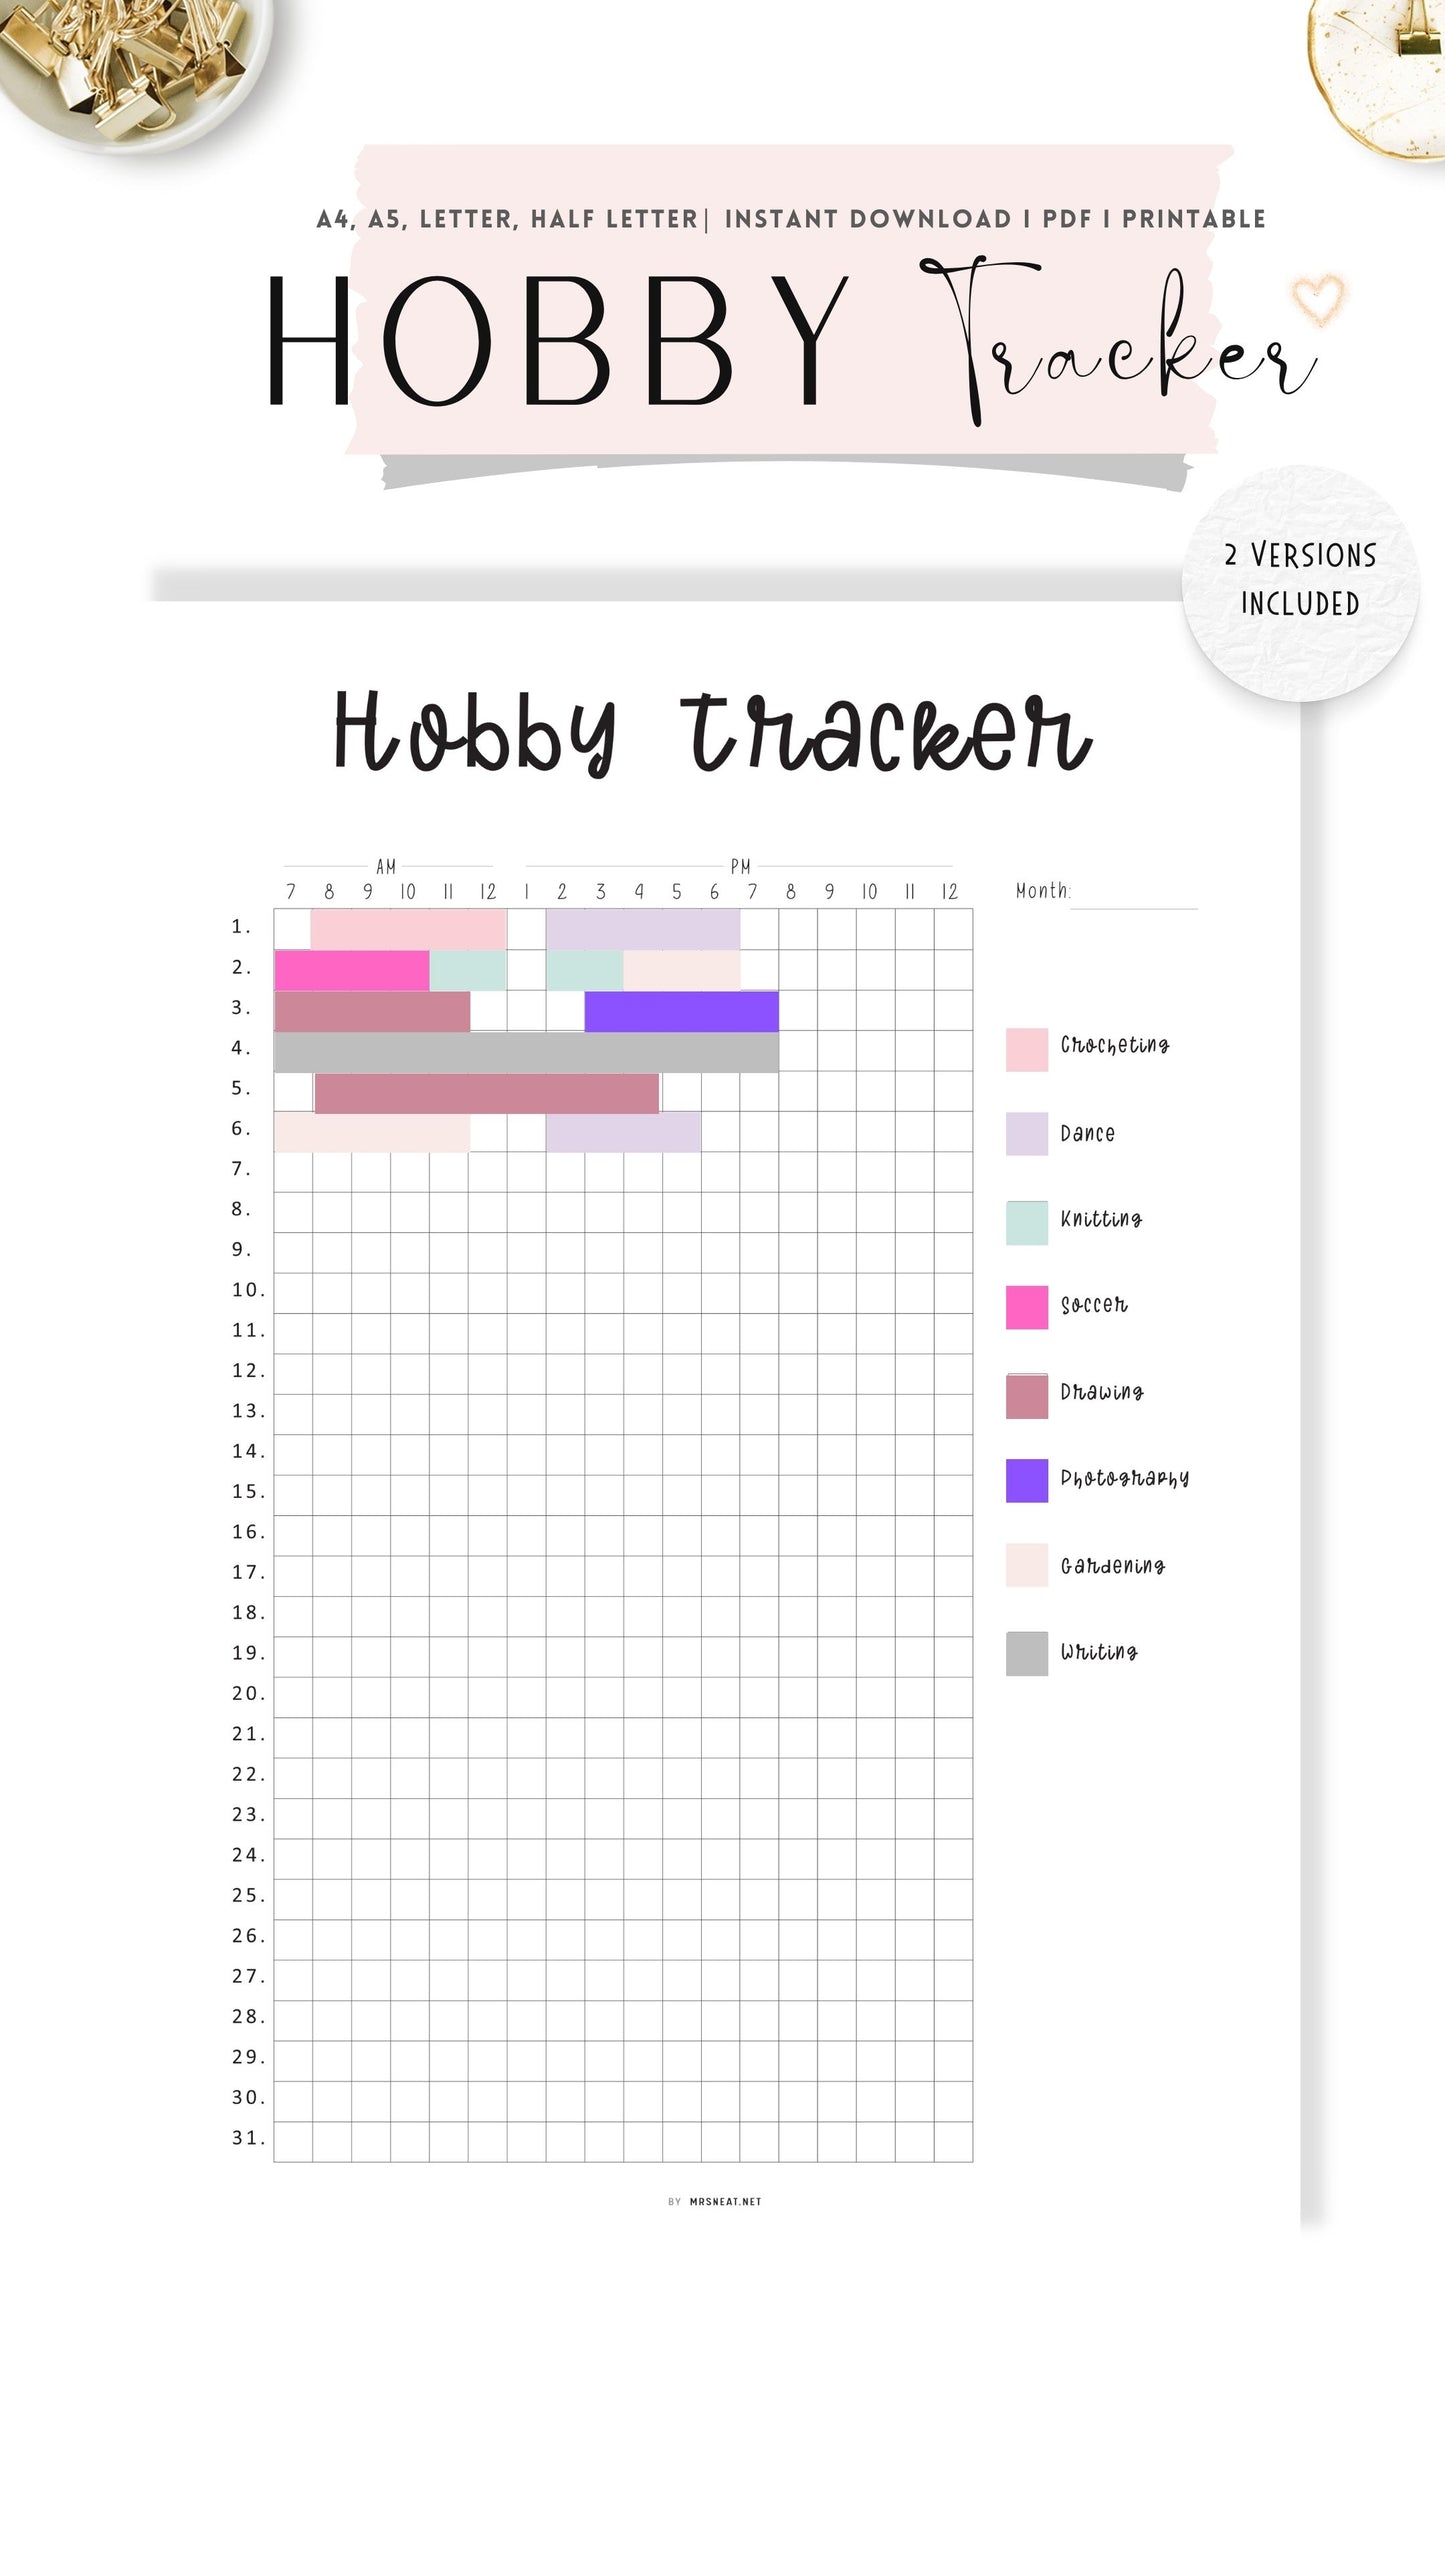 Monthly Hobby Tracker Template